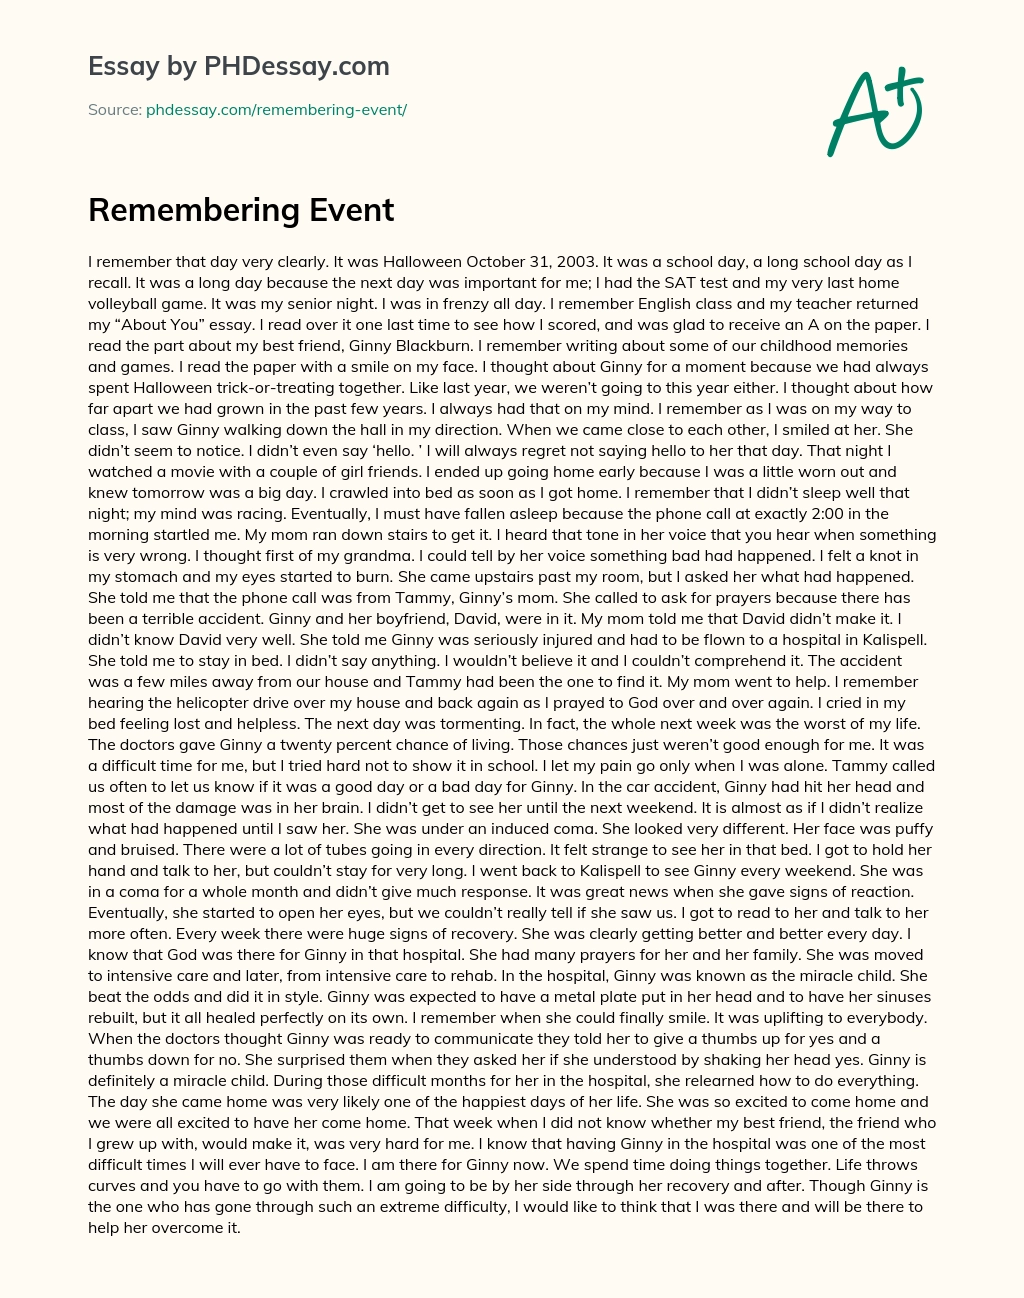 how to write a remembered event essay